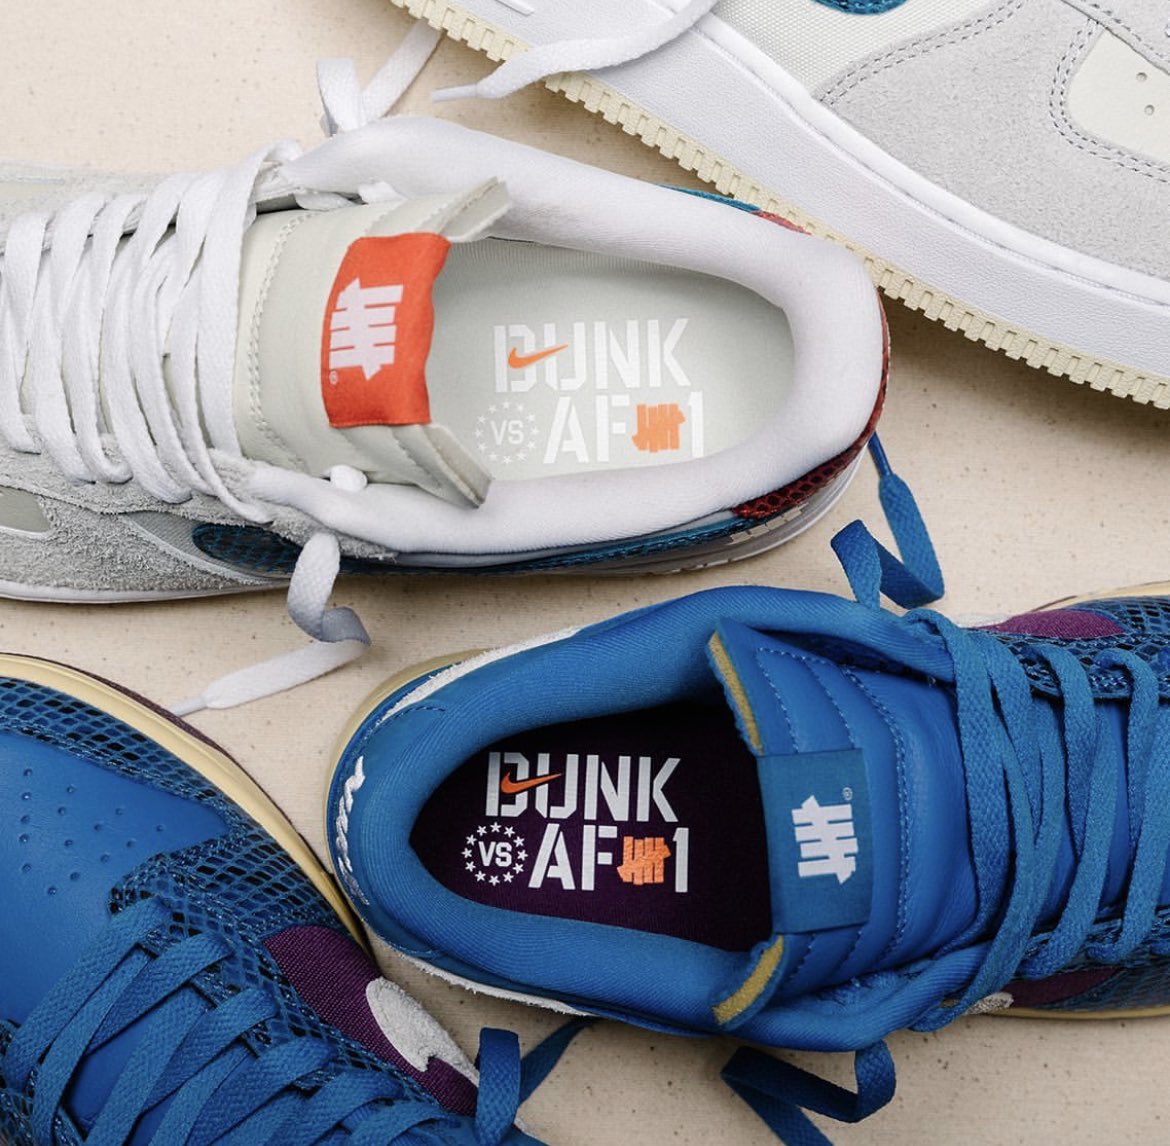 UNDEFEATED x NIKE AIR FORCE 1 Dunk vs AF-1 が8月20日SNKRSで発売